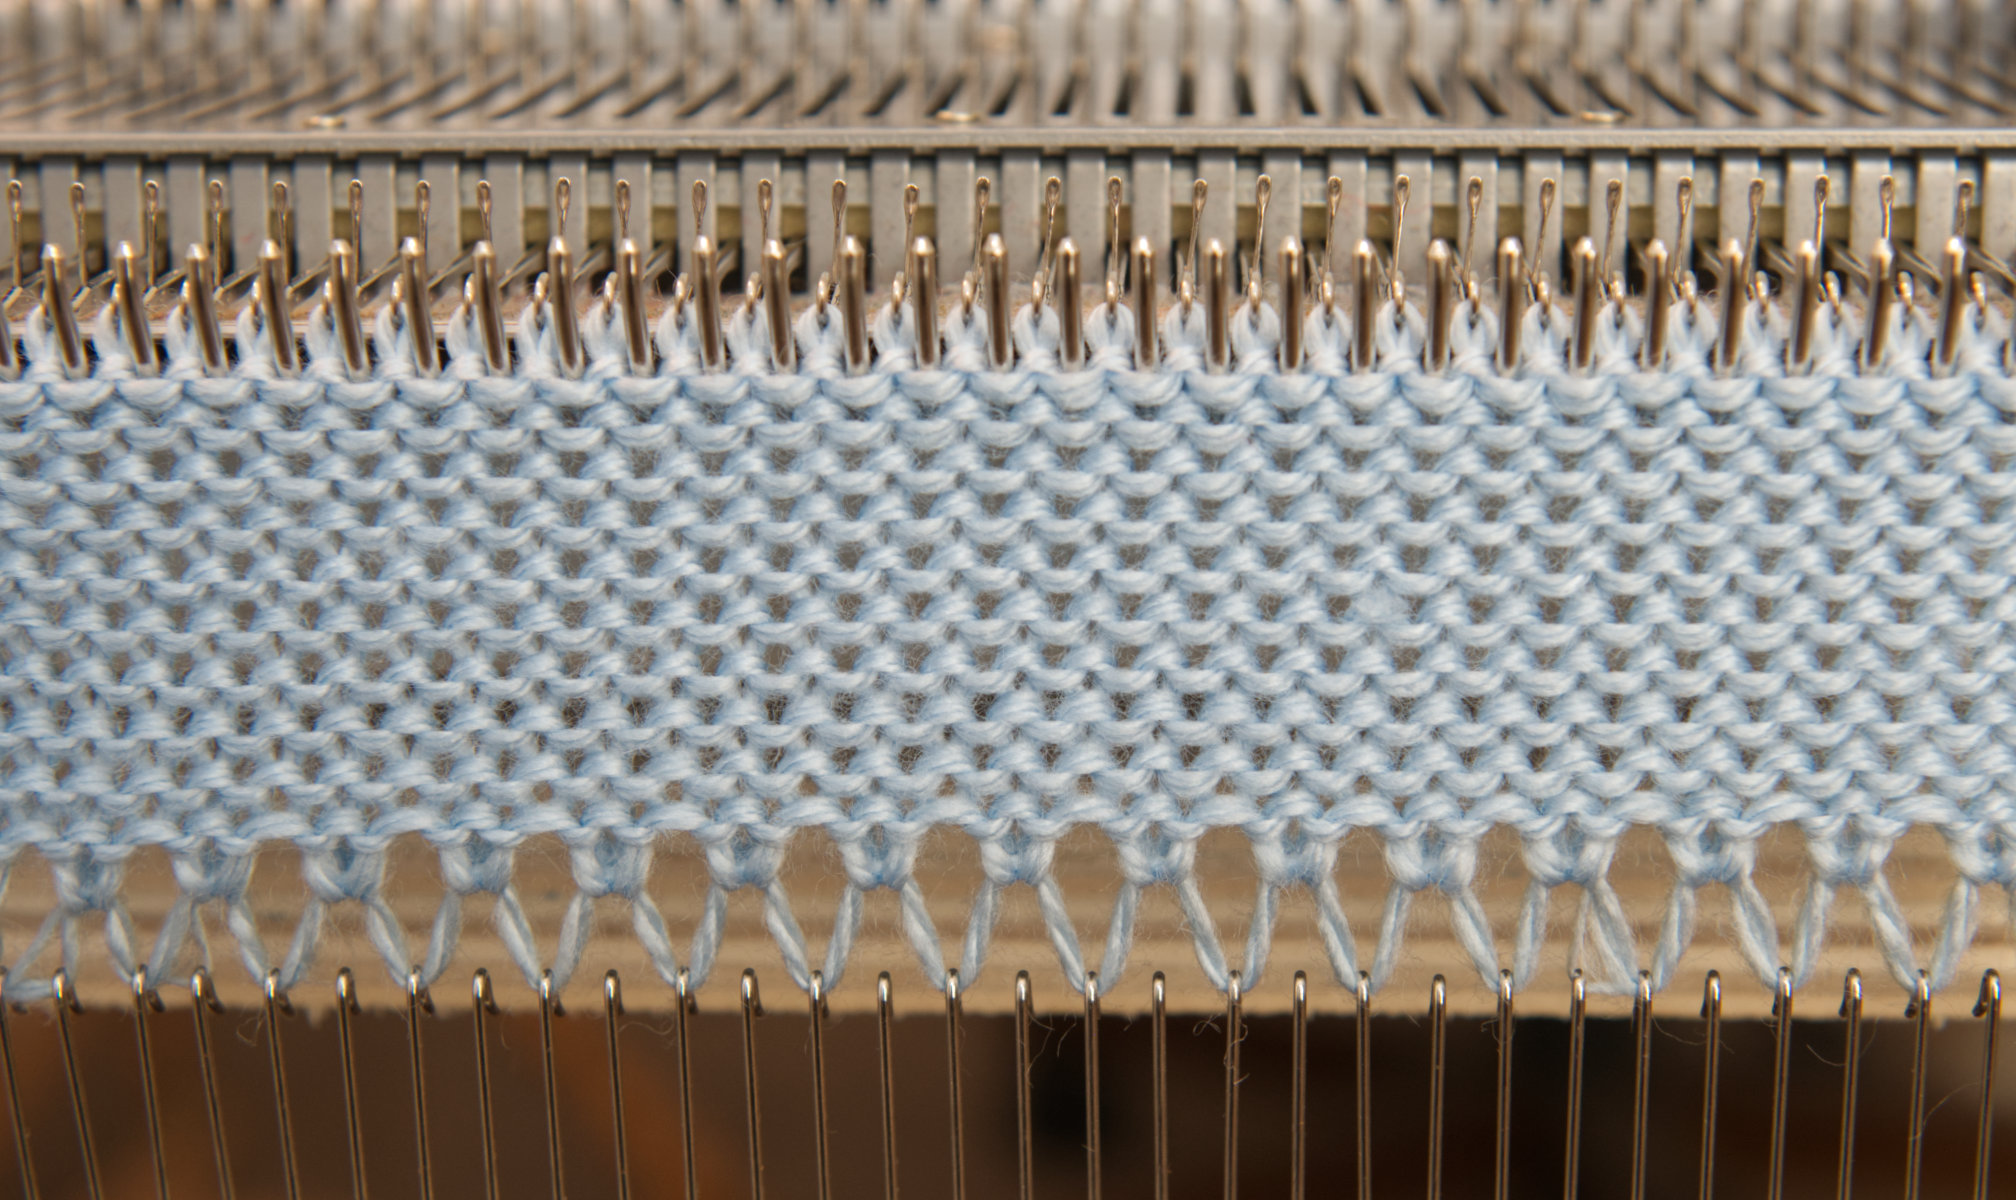 Image: open cast on in a flatbed knitting machine